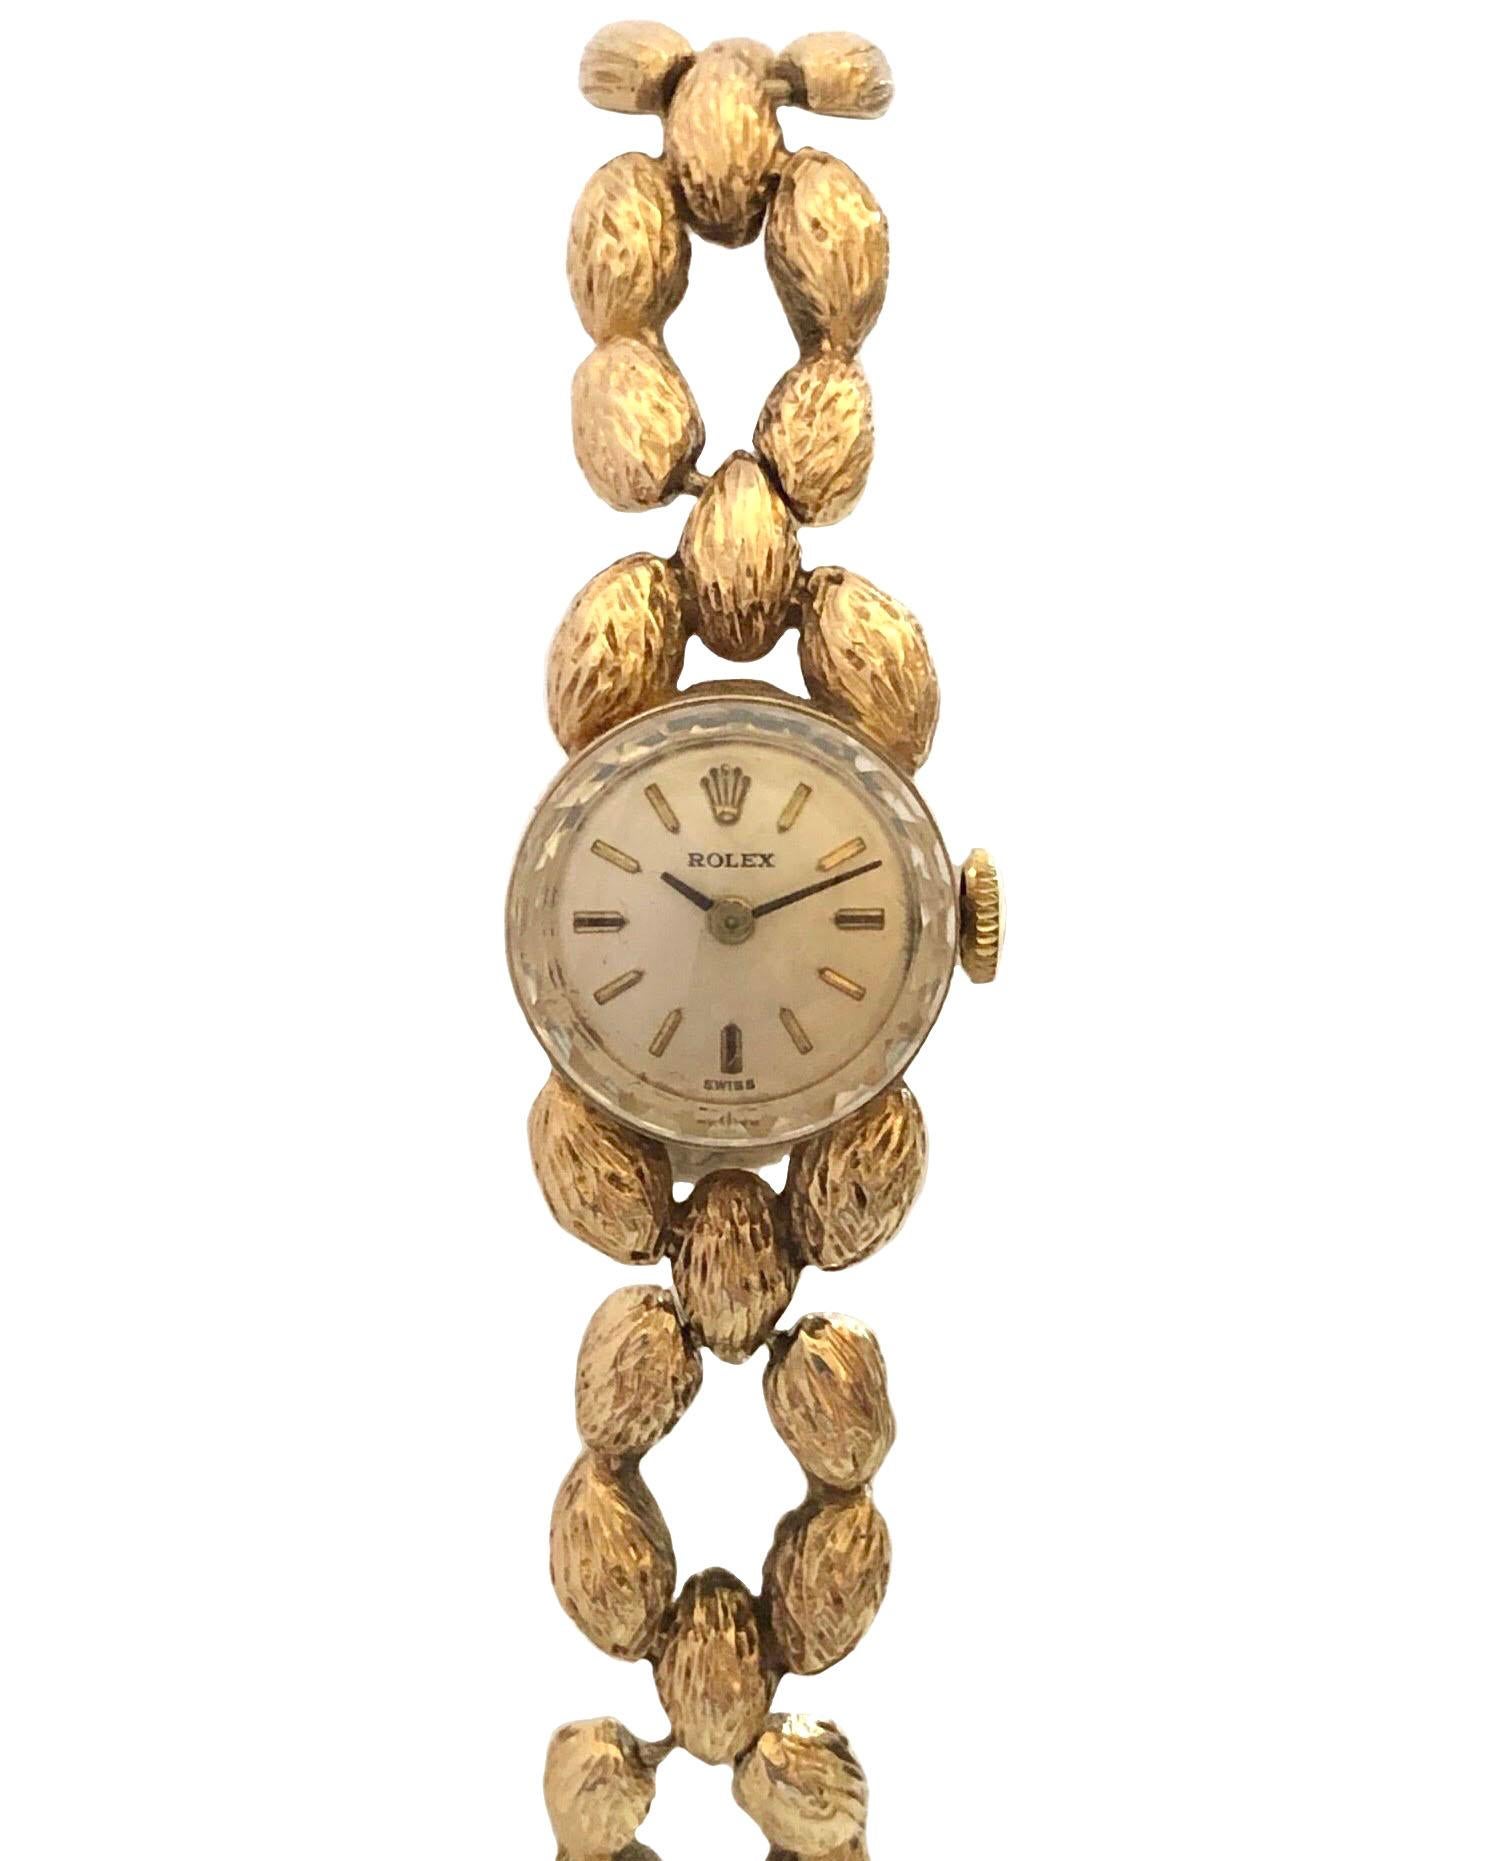 Circa 1960s Ladies Rolex Bracelet Wrist Watch, 15 M.M.  14K yellow Gold 2 Piece case, 17 Jewel mechanical, Manual wind movement, original Silver, Satin Dial with raised Gold markers, Rolex logo Crown. 7/16 inch wide textured link bracelet with Rolex